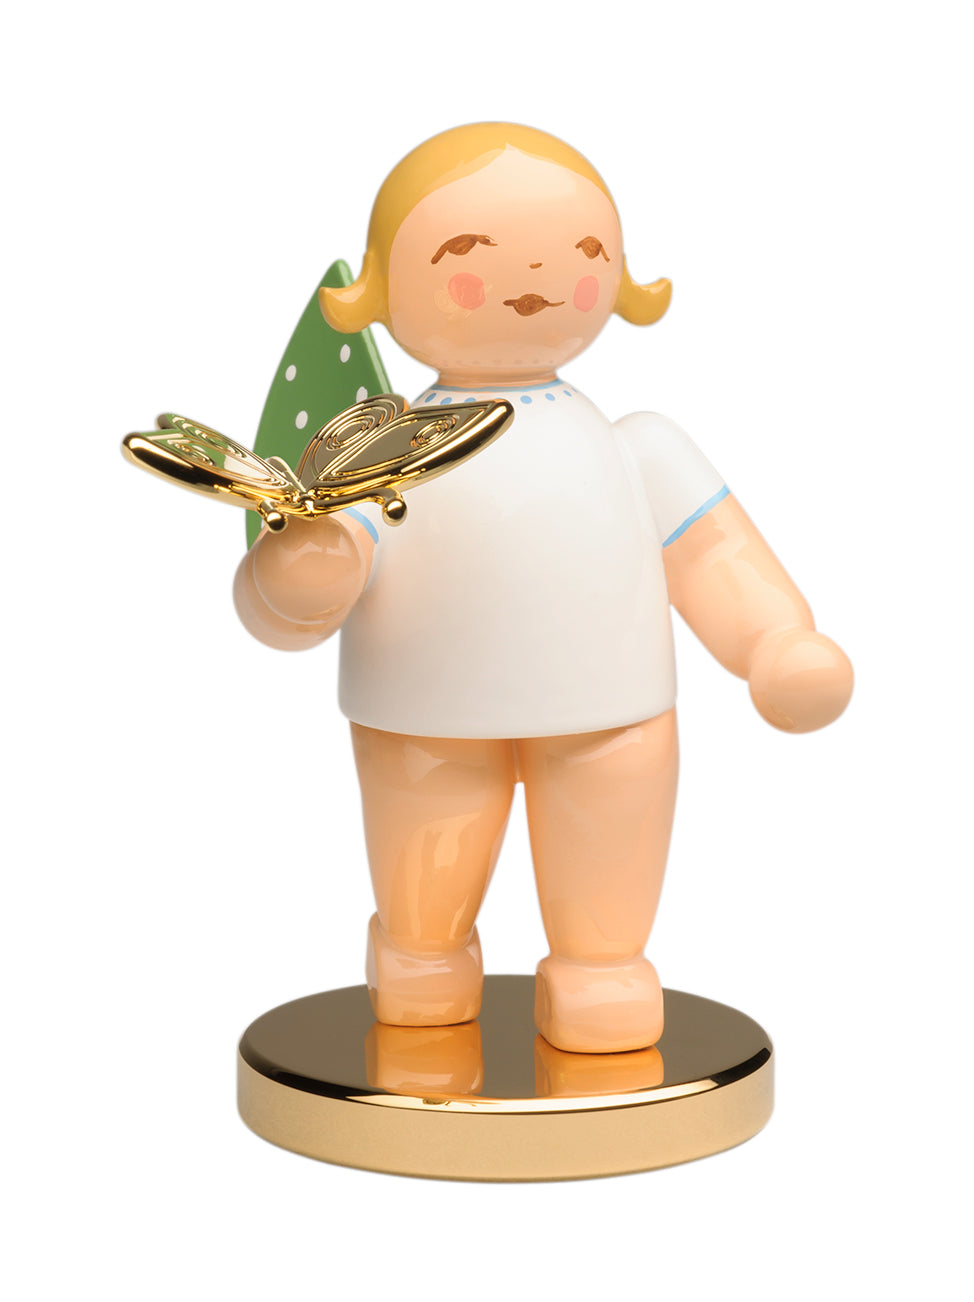 Limited Gold Edition No. 13 - Grunhainichen Angel / The Dreamer / Butterfly / in Splinter Box on a Gold-Plated Base / New 2020